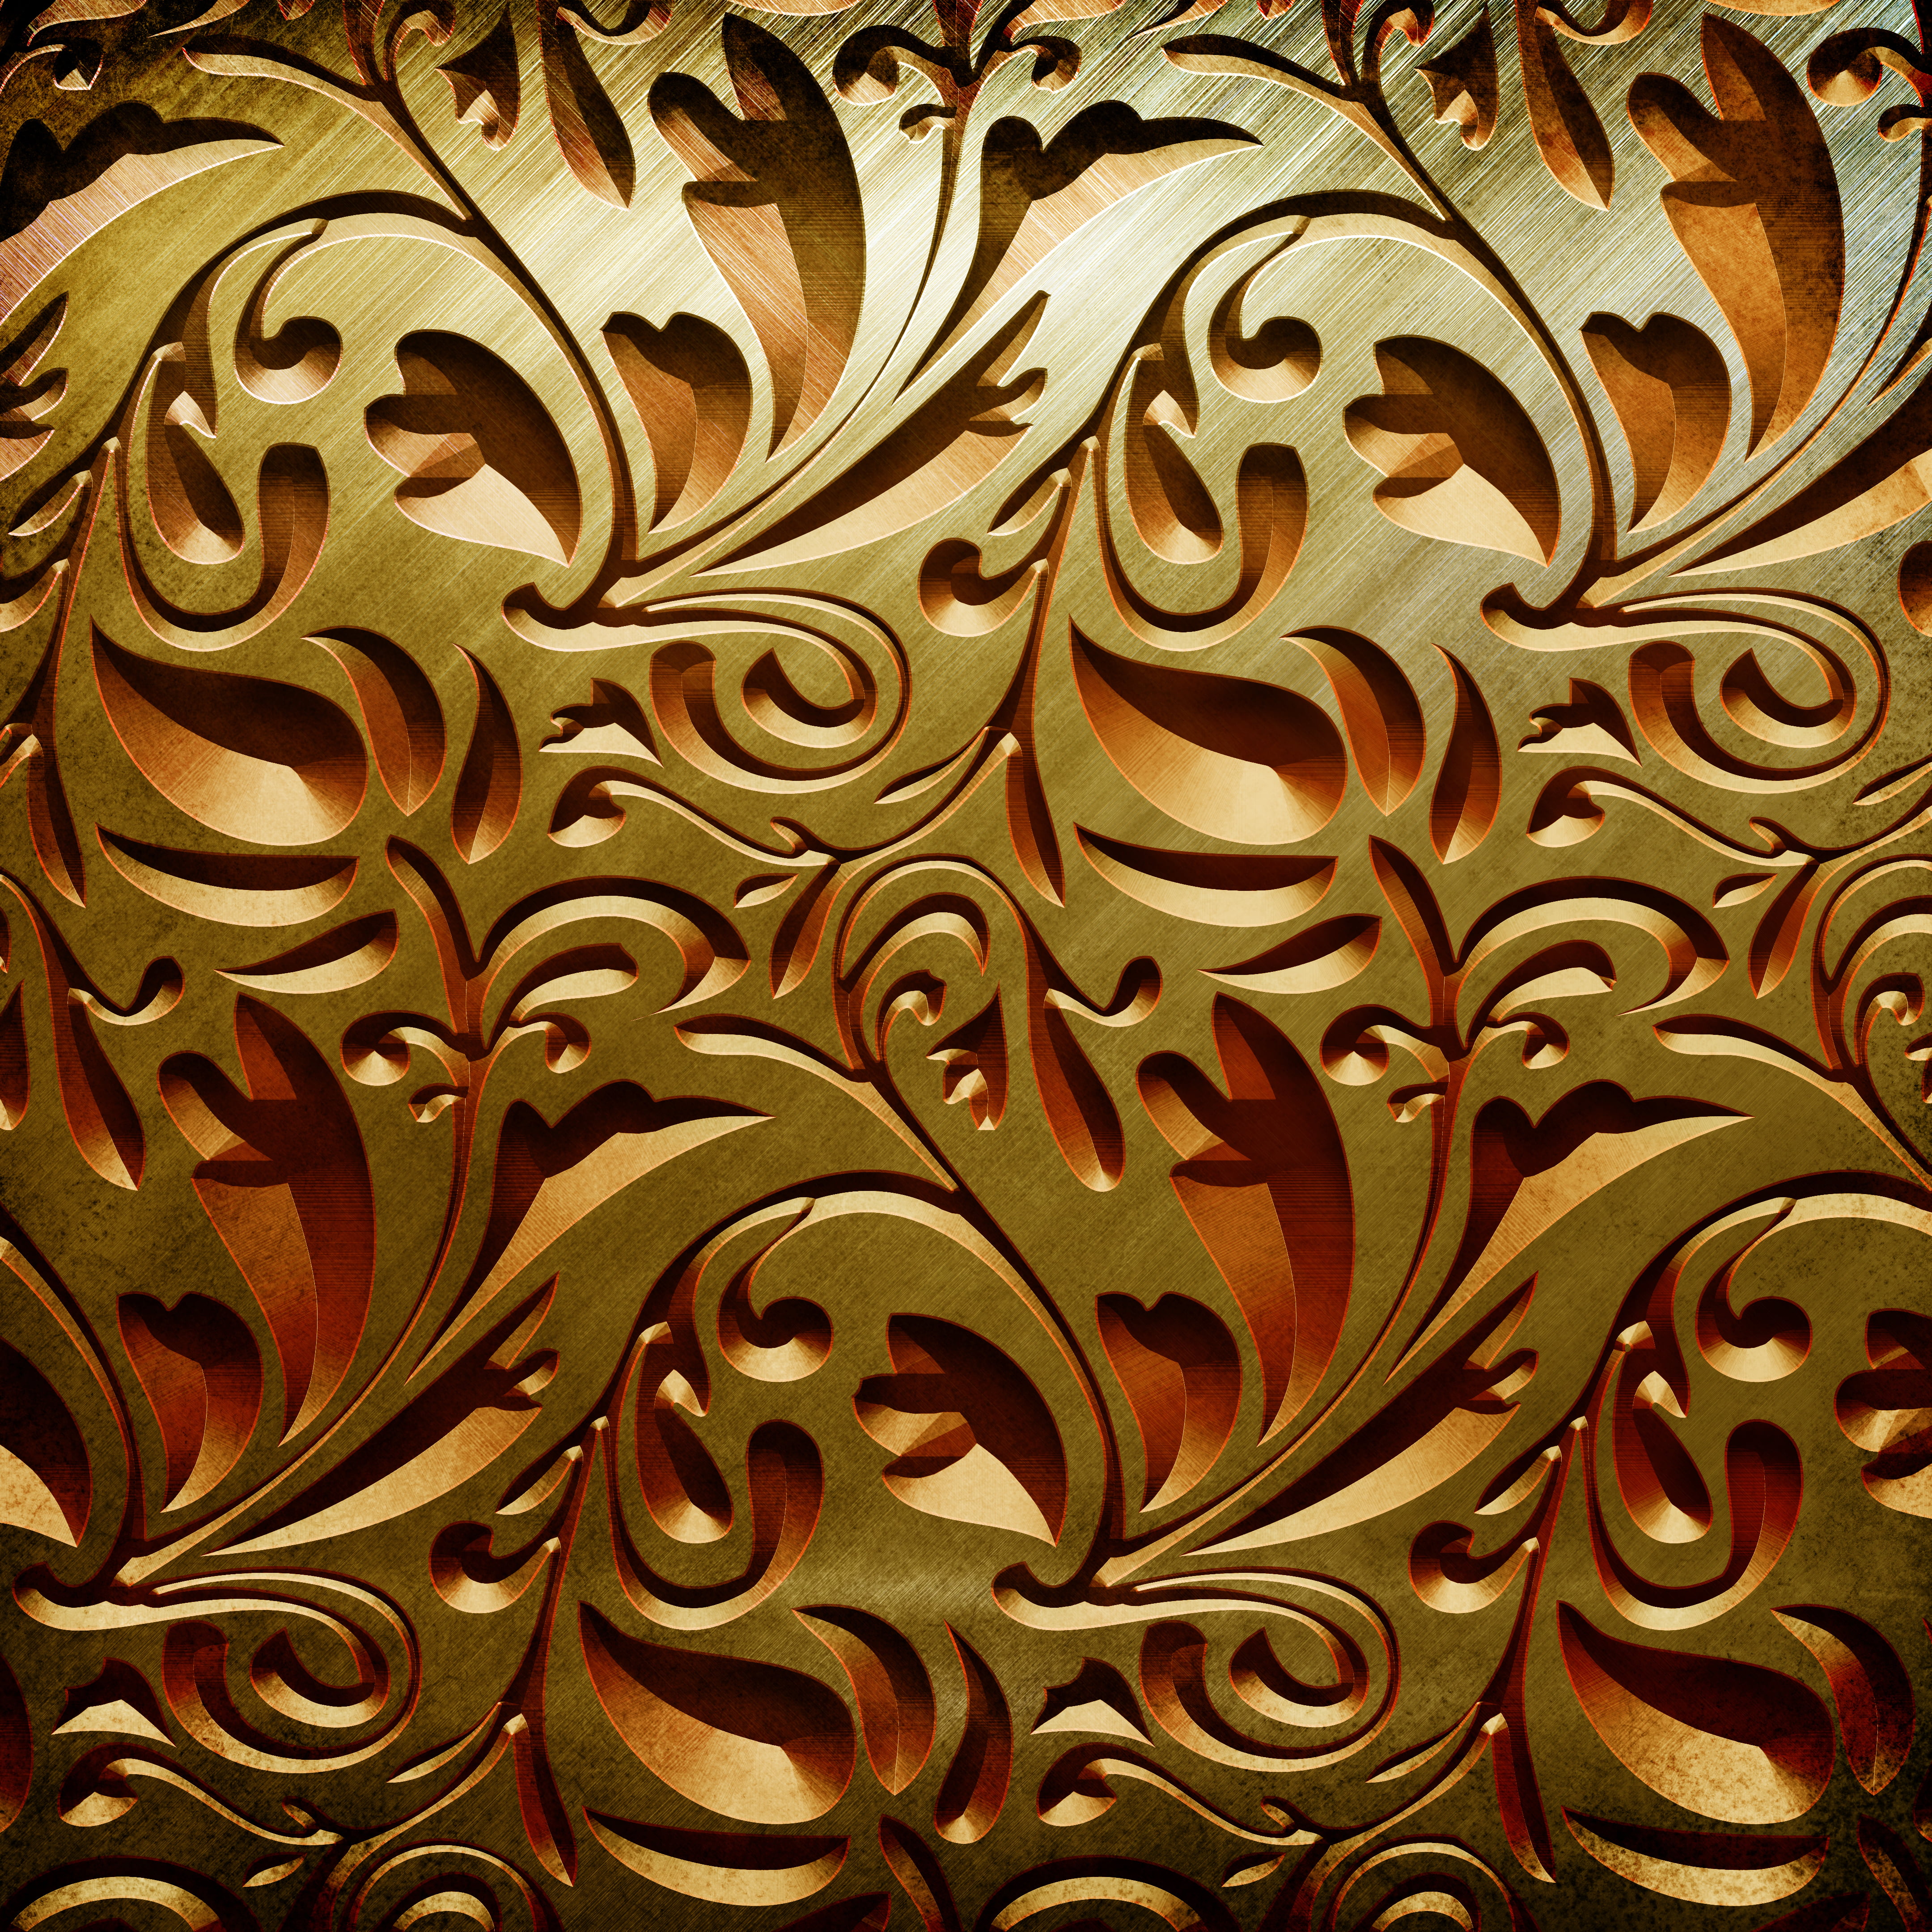 brass-colored floral engraved decor, background, patterns, texture